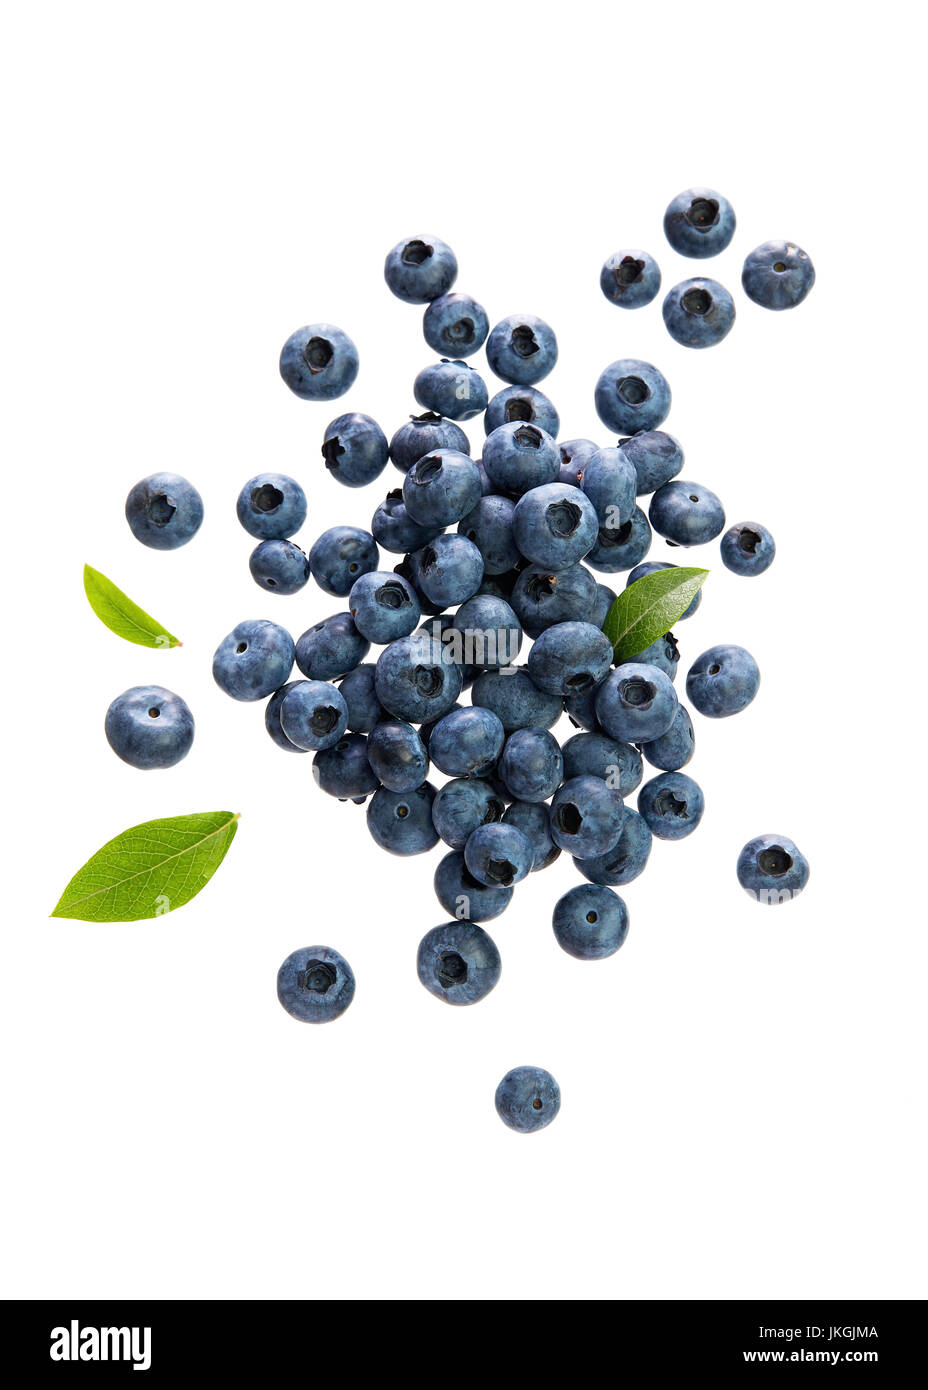 Fresh Blueberries With Leaves on White Background. Scattered blueberries over white background. Stock Photo